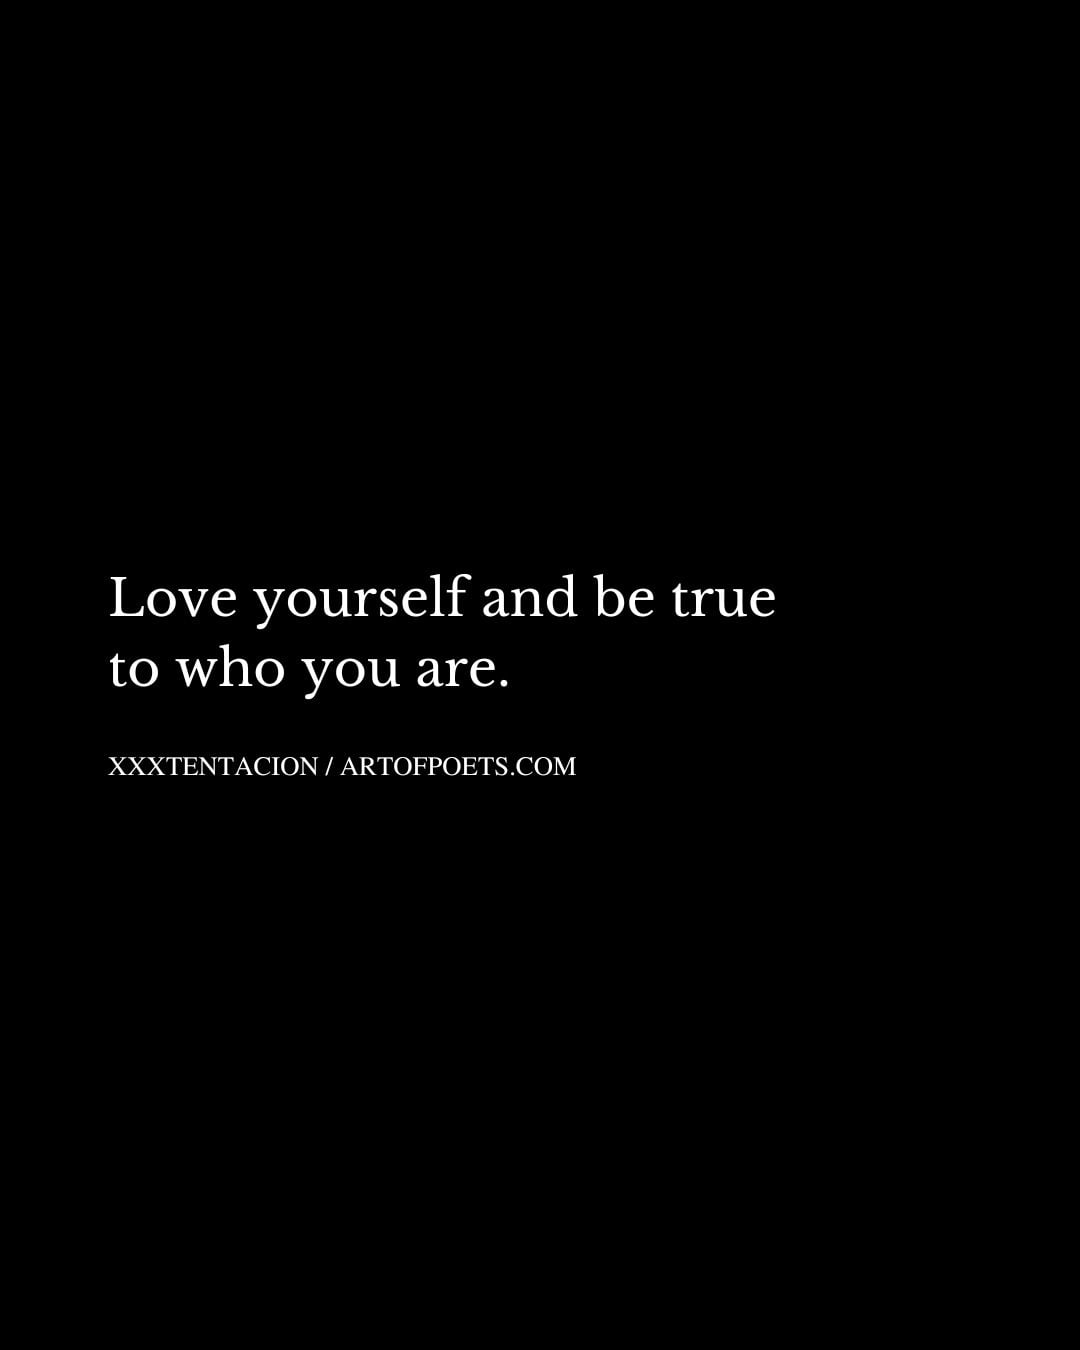 Love yourself and be true to who you are